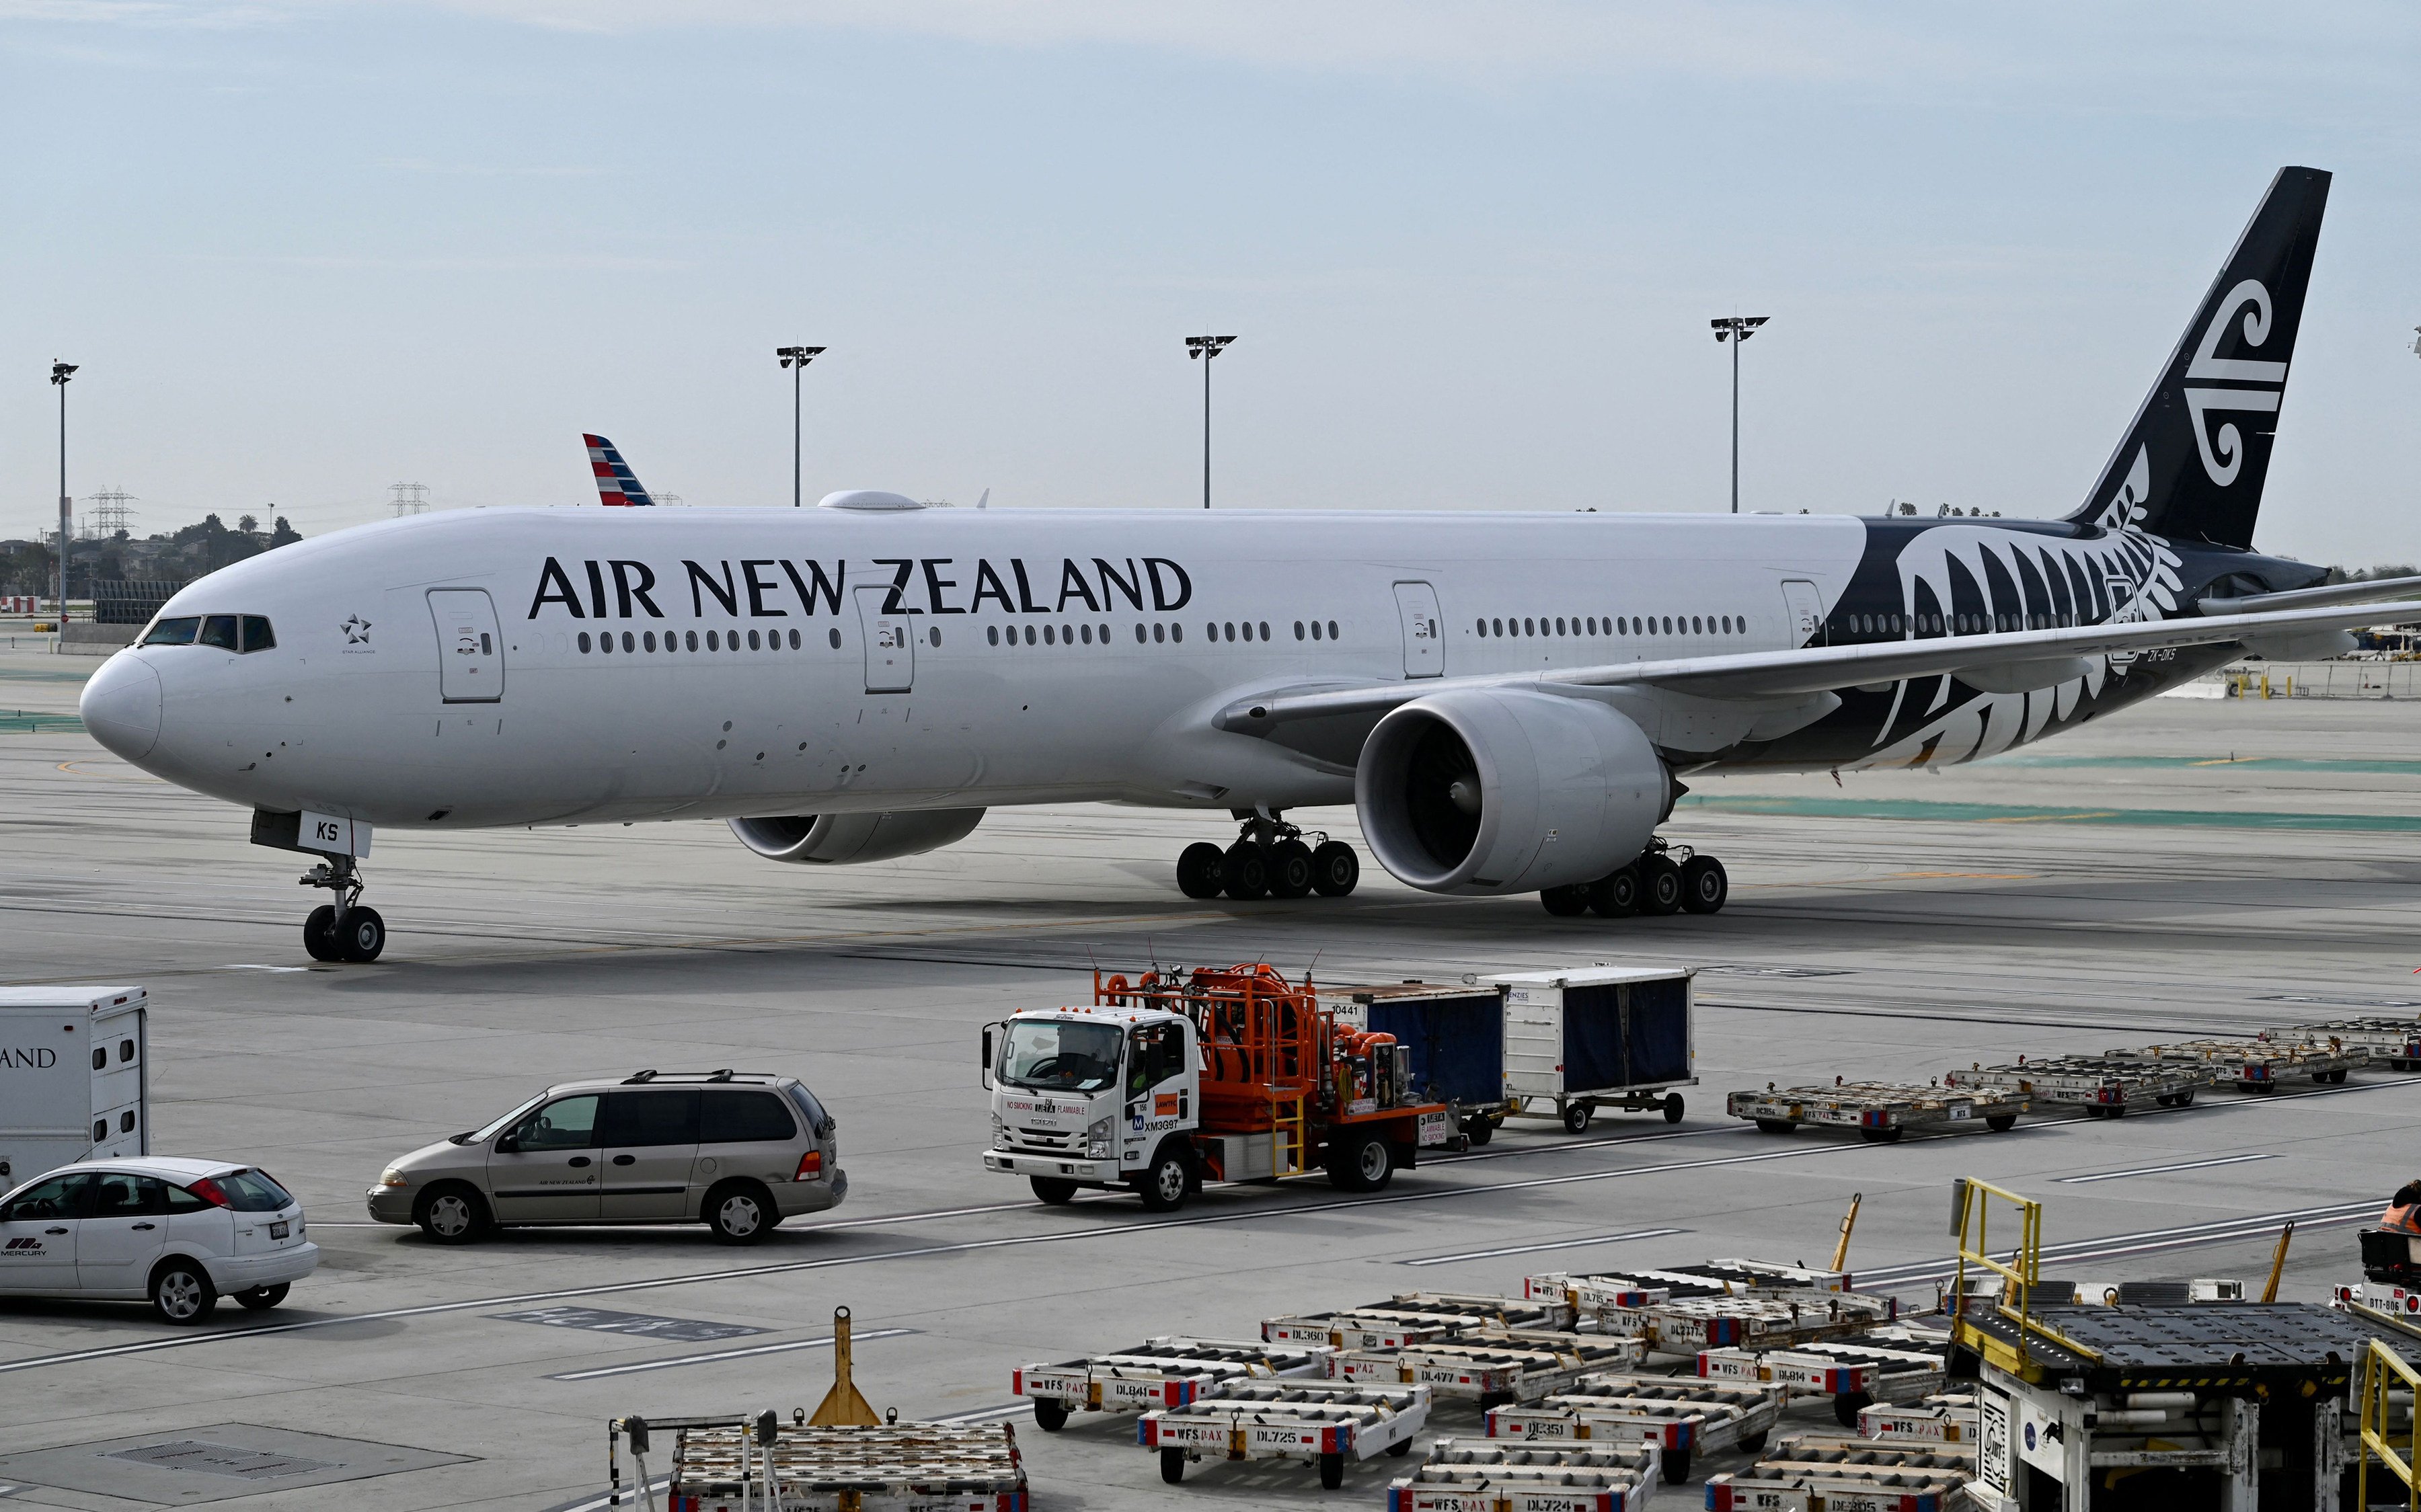 Air New Zealand came out number one in many key areas in a recent study. Photo: Getty